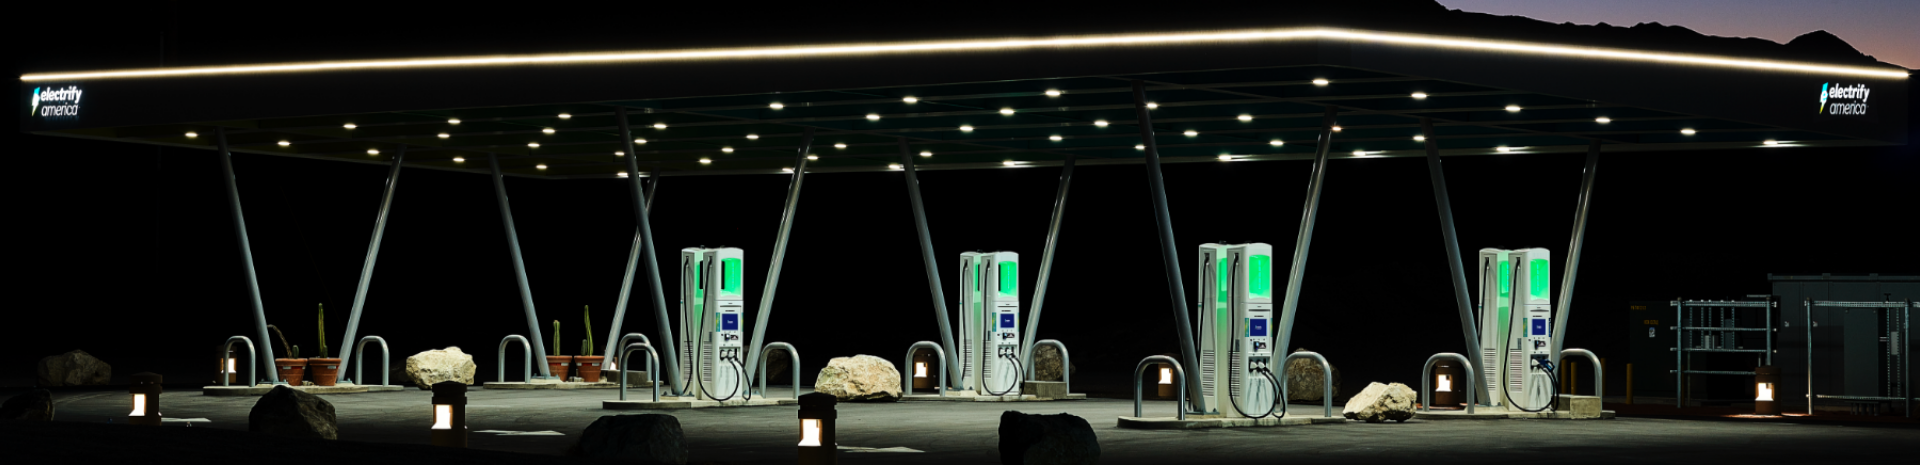 Electrify America chargers under a lighted canopy at night